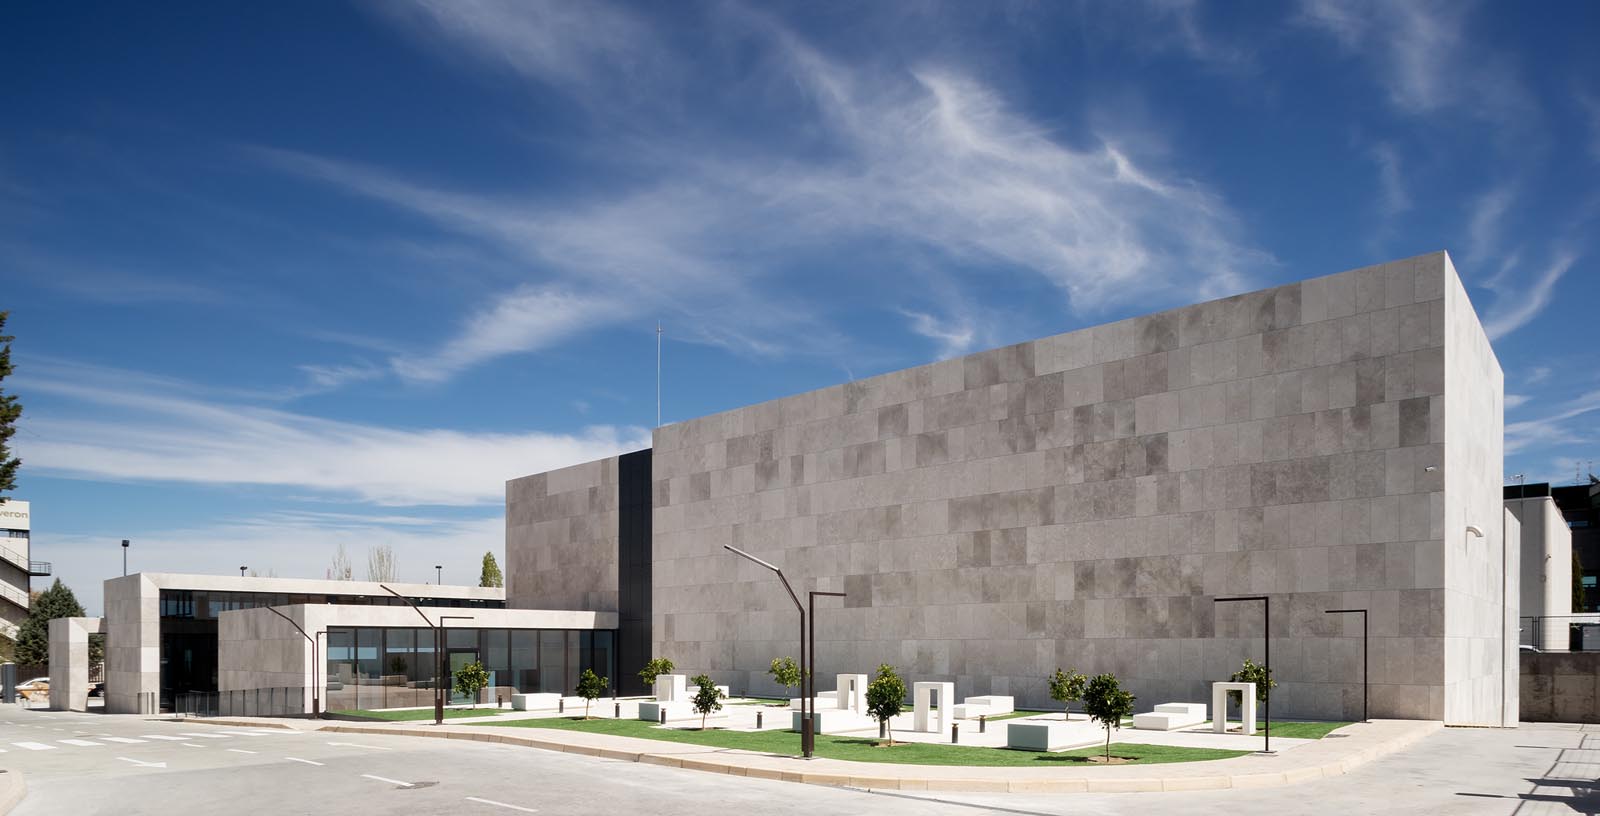 protontherapy center_Architecture_PM_02_IDOM_copyright Jorge Allende